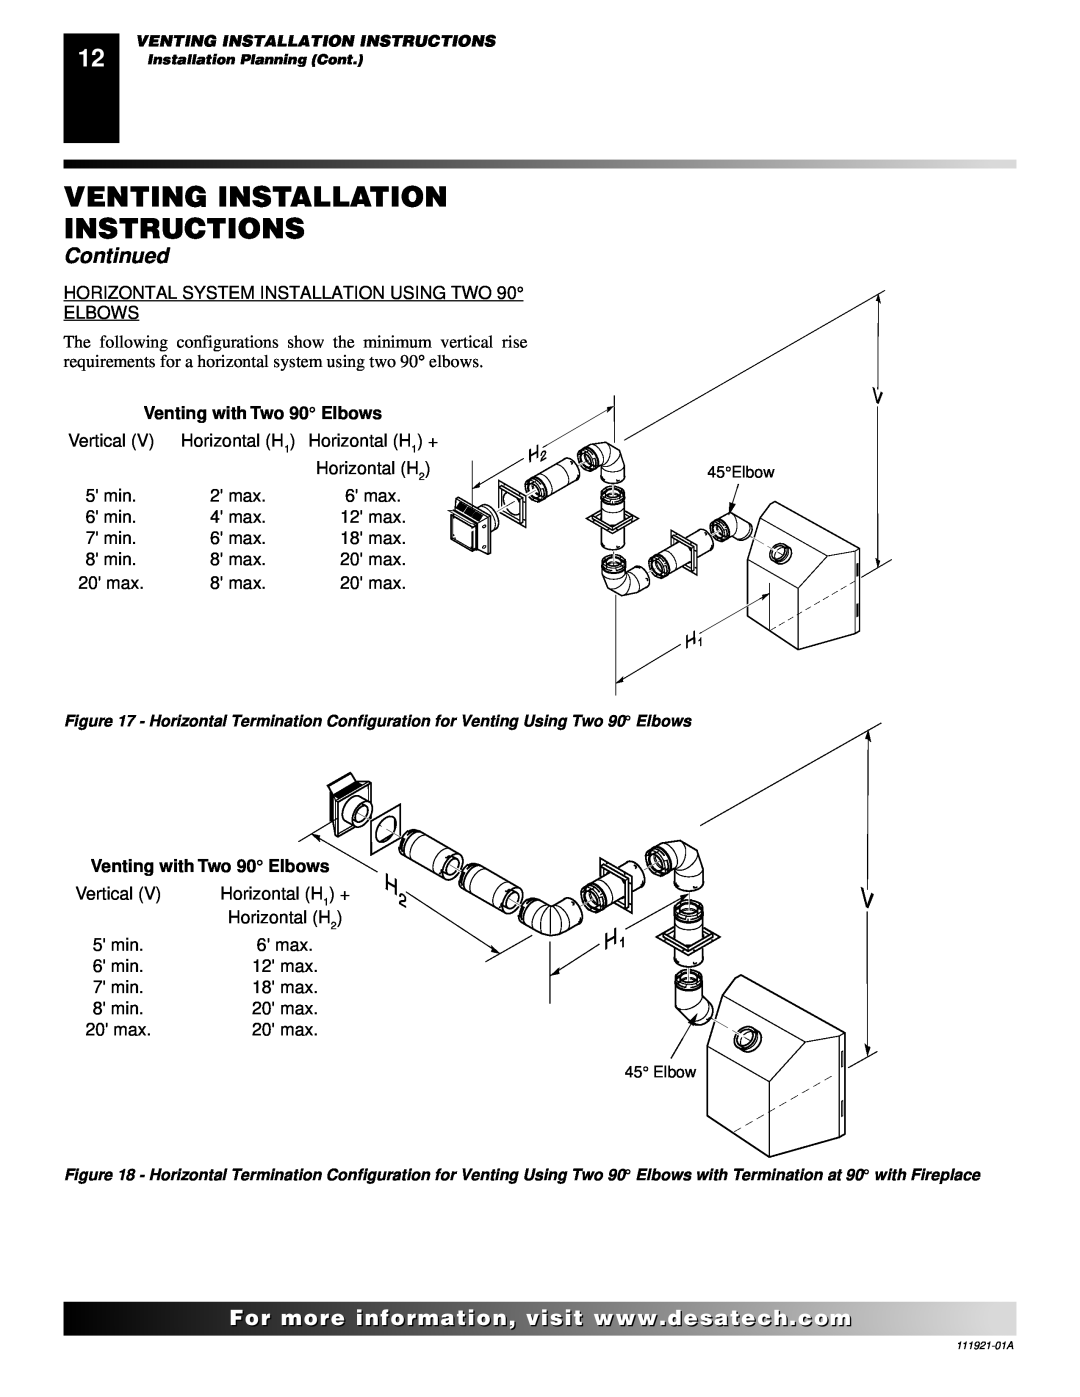 Desa (V)K42N installation manual Venting Installation Instructions, Continued, Venting with Two 90 Elbows 